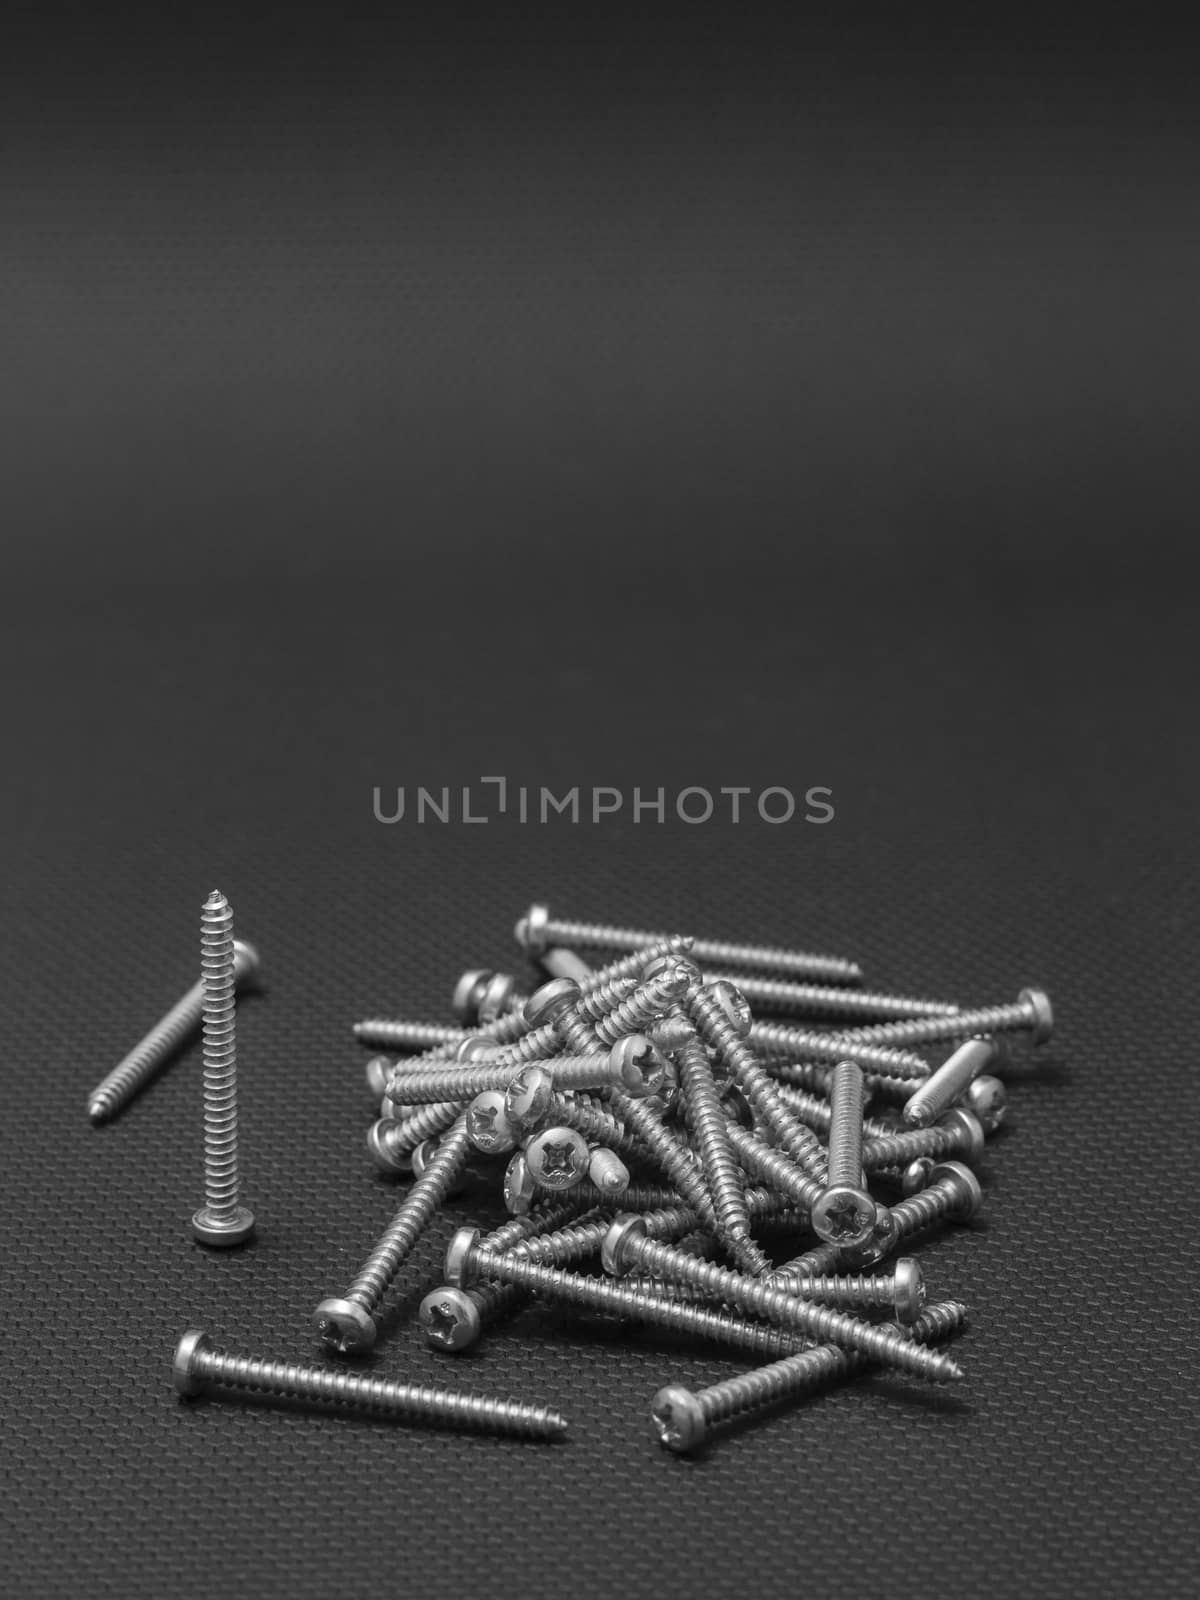 Screws located on a black background by mailos